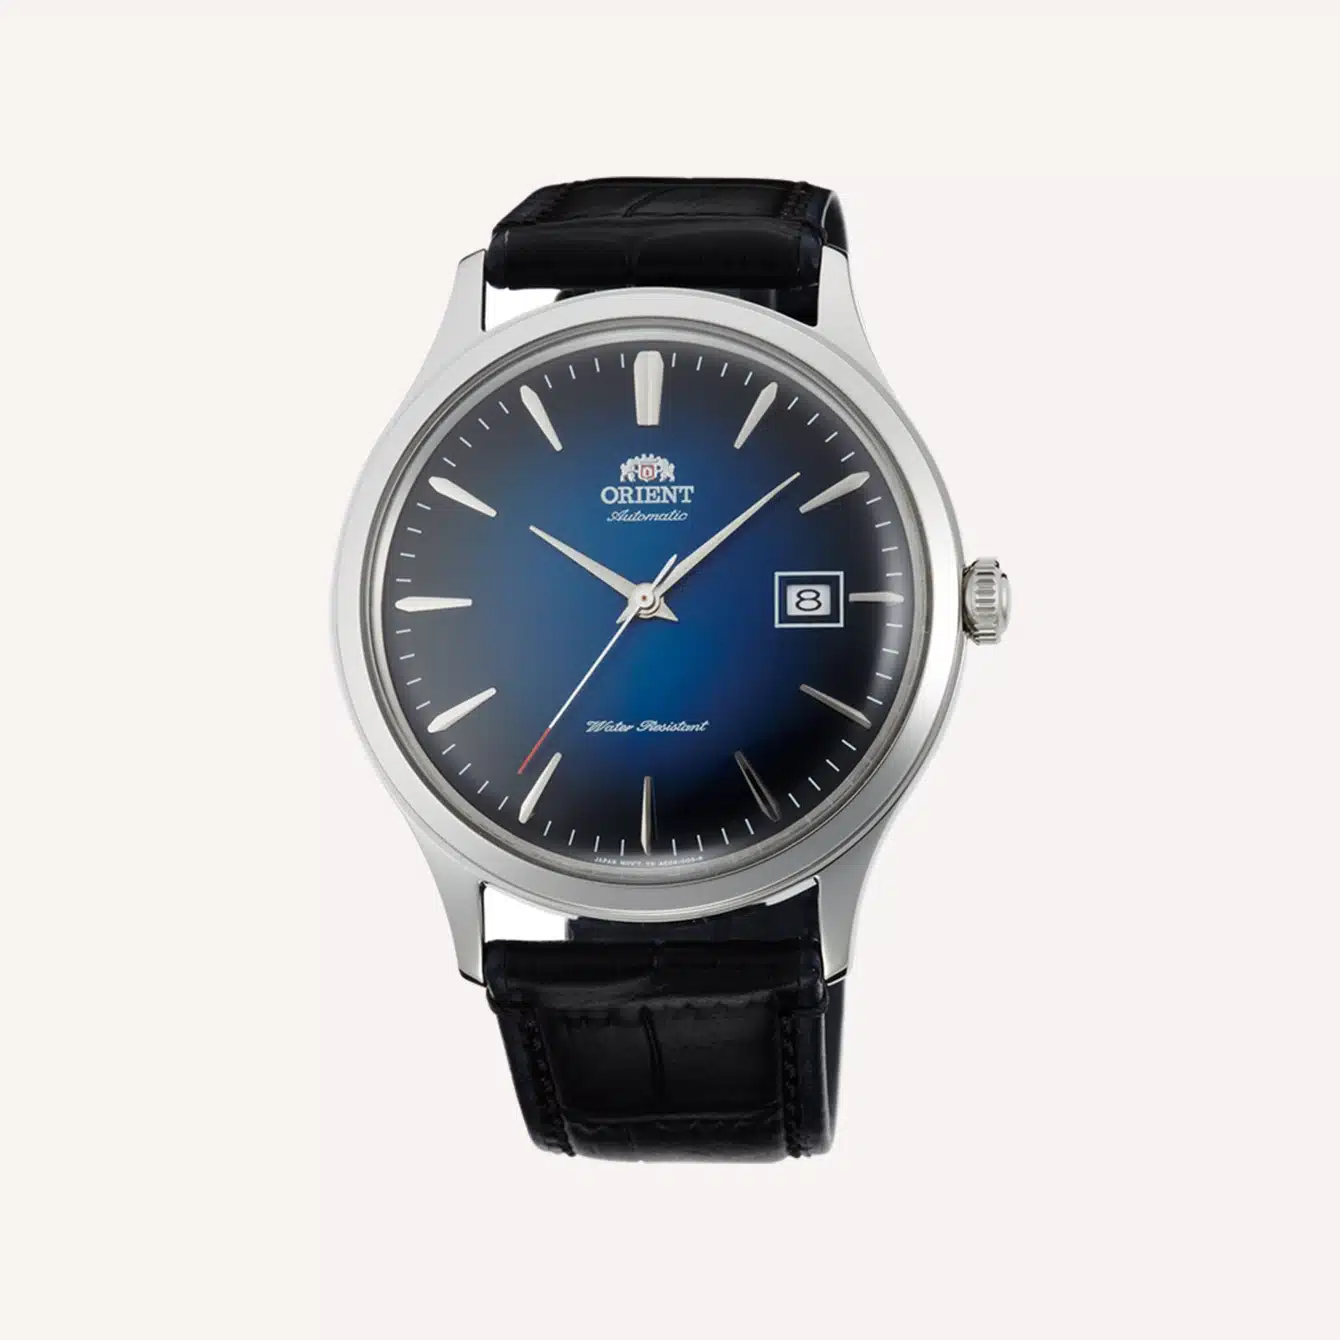 10 Best Orient Watches That You’ll Love-2